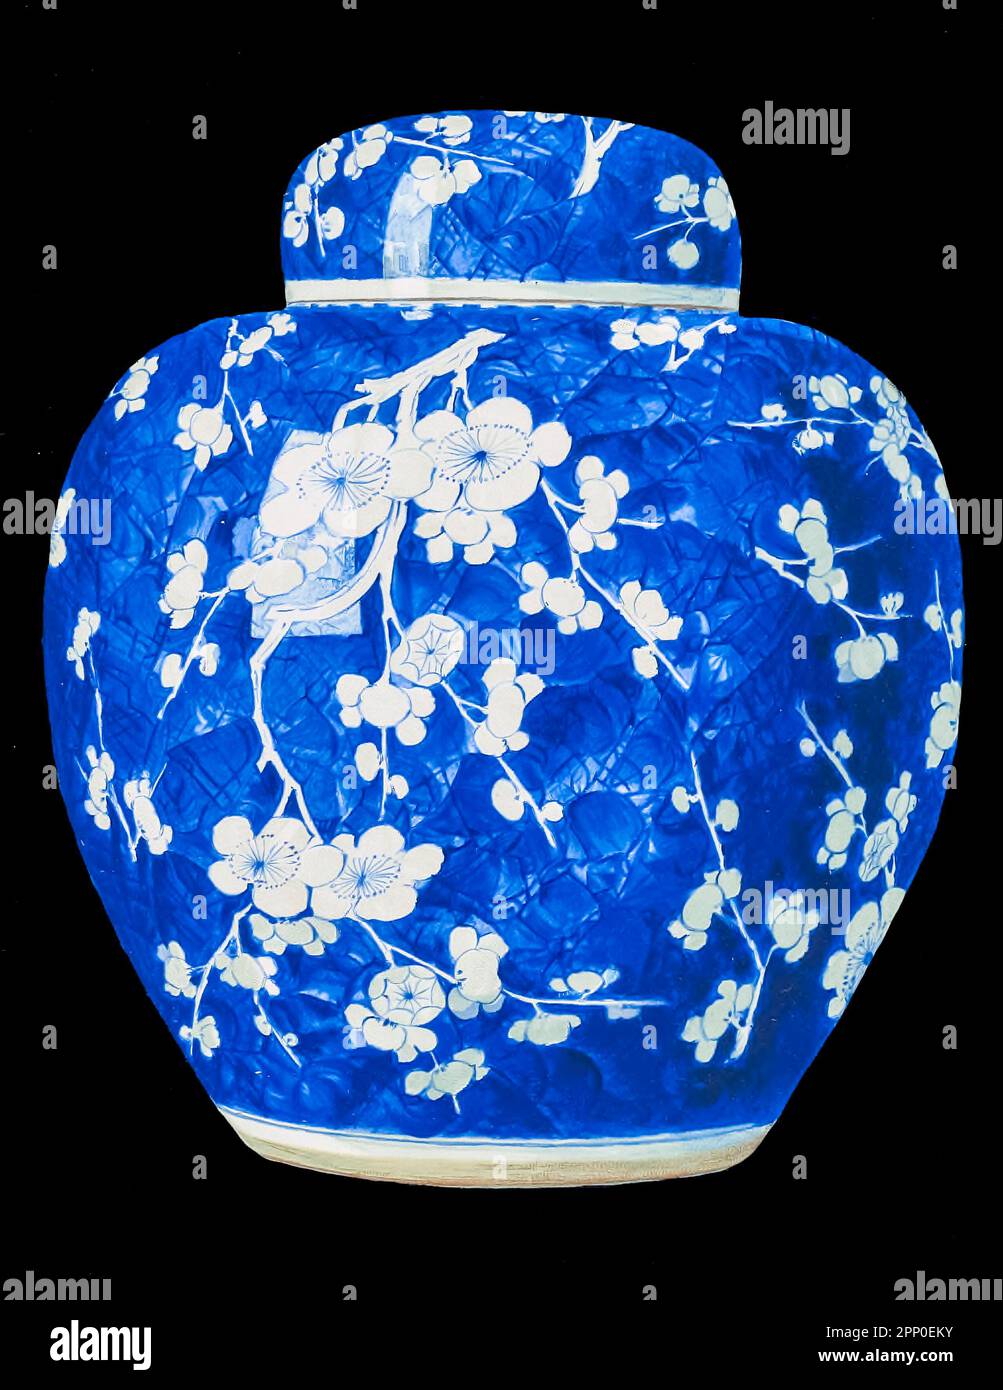 PLUM-BLOSSOM JAR. (Mei Hua Kuan) of globular form. With a bell-shaped cover, decorated in brilliant cobalt blue of the K'ang-hsi Period (A. D. 1662- 1722), with blossoming branches and twigs of the floral emblem of the New Year. From the book ' ORIENTAL CERAMIC ART COLLECTION OF William Thompson Walters ' Published in 1897 Stock Photo